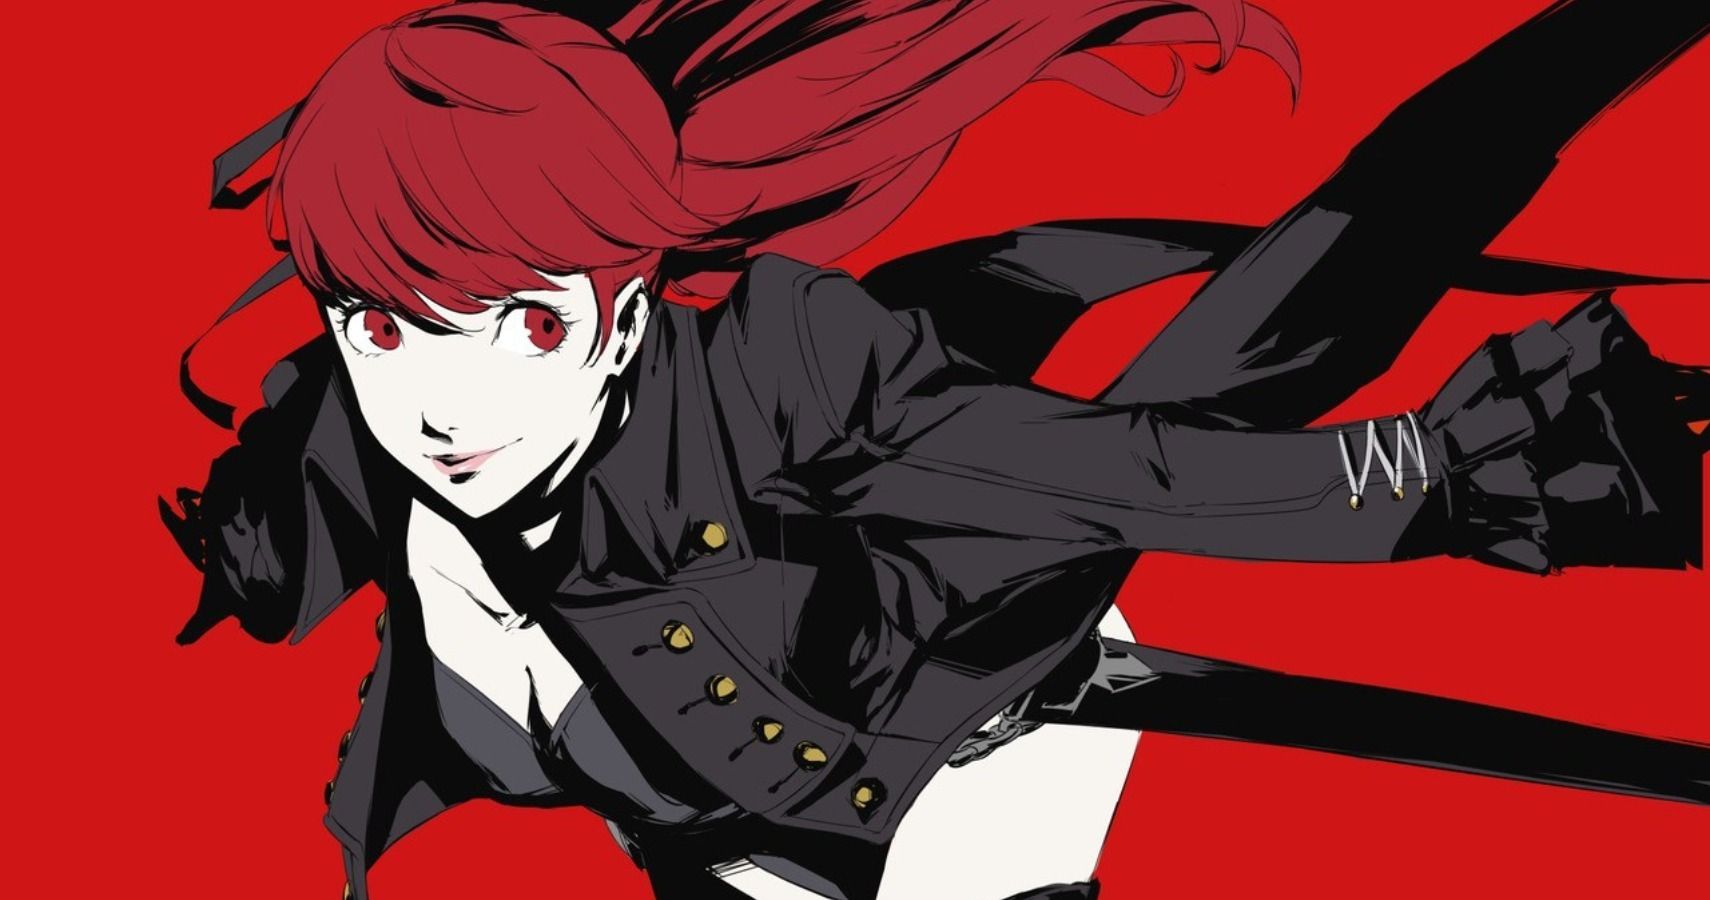 Persona 5 Royal Saw Record Sales In The West